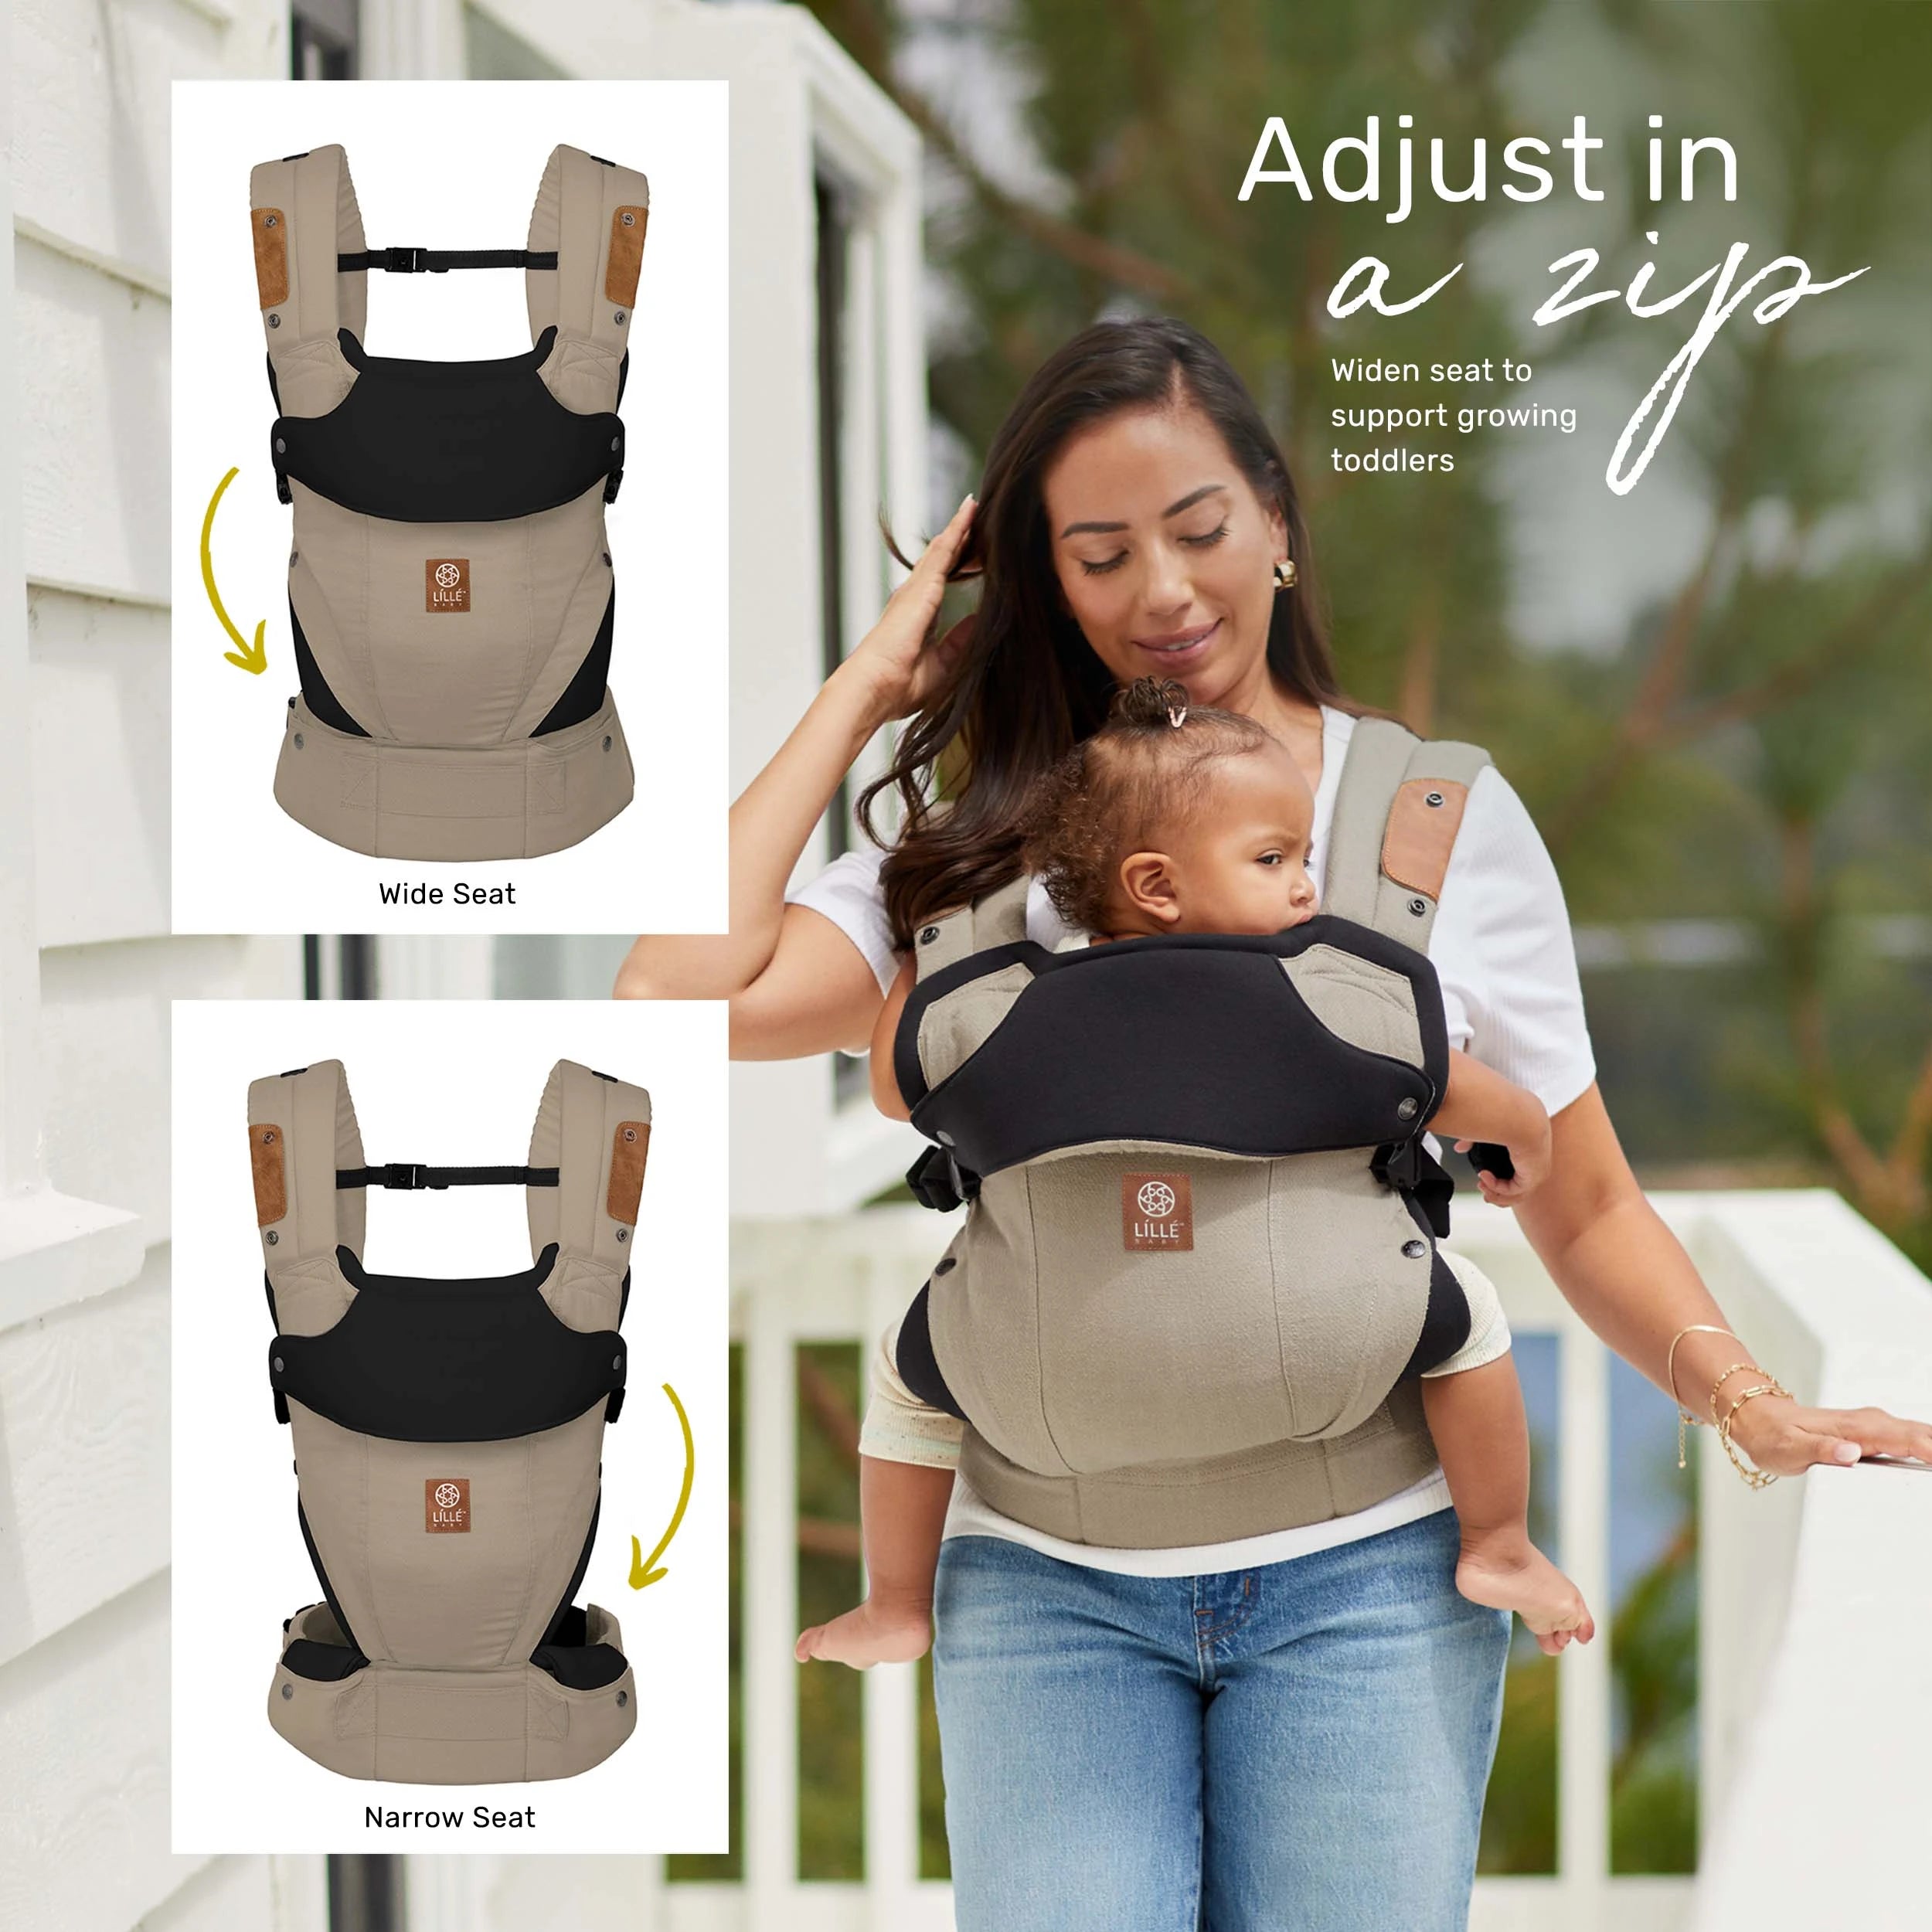 Elevate adjust in a zip! Widen seat to support growing toddlers. Zip up to wide seat and zip down to narrow seat. 